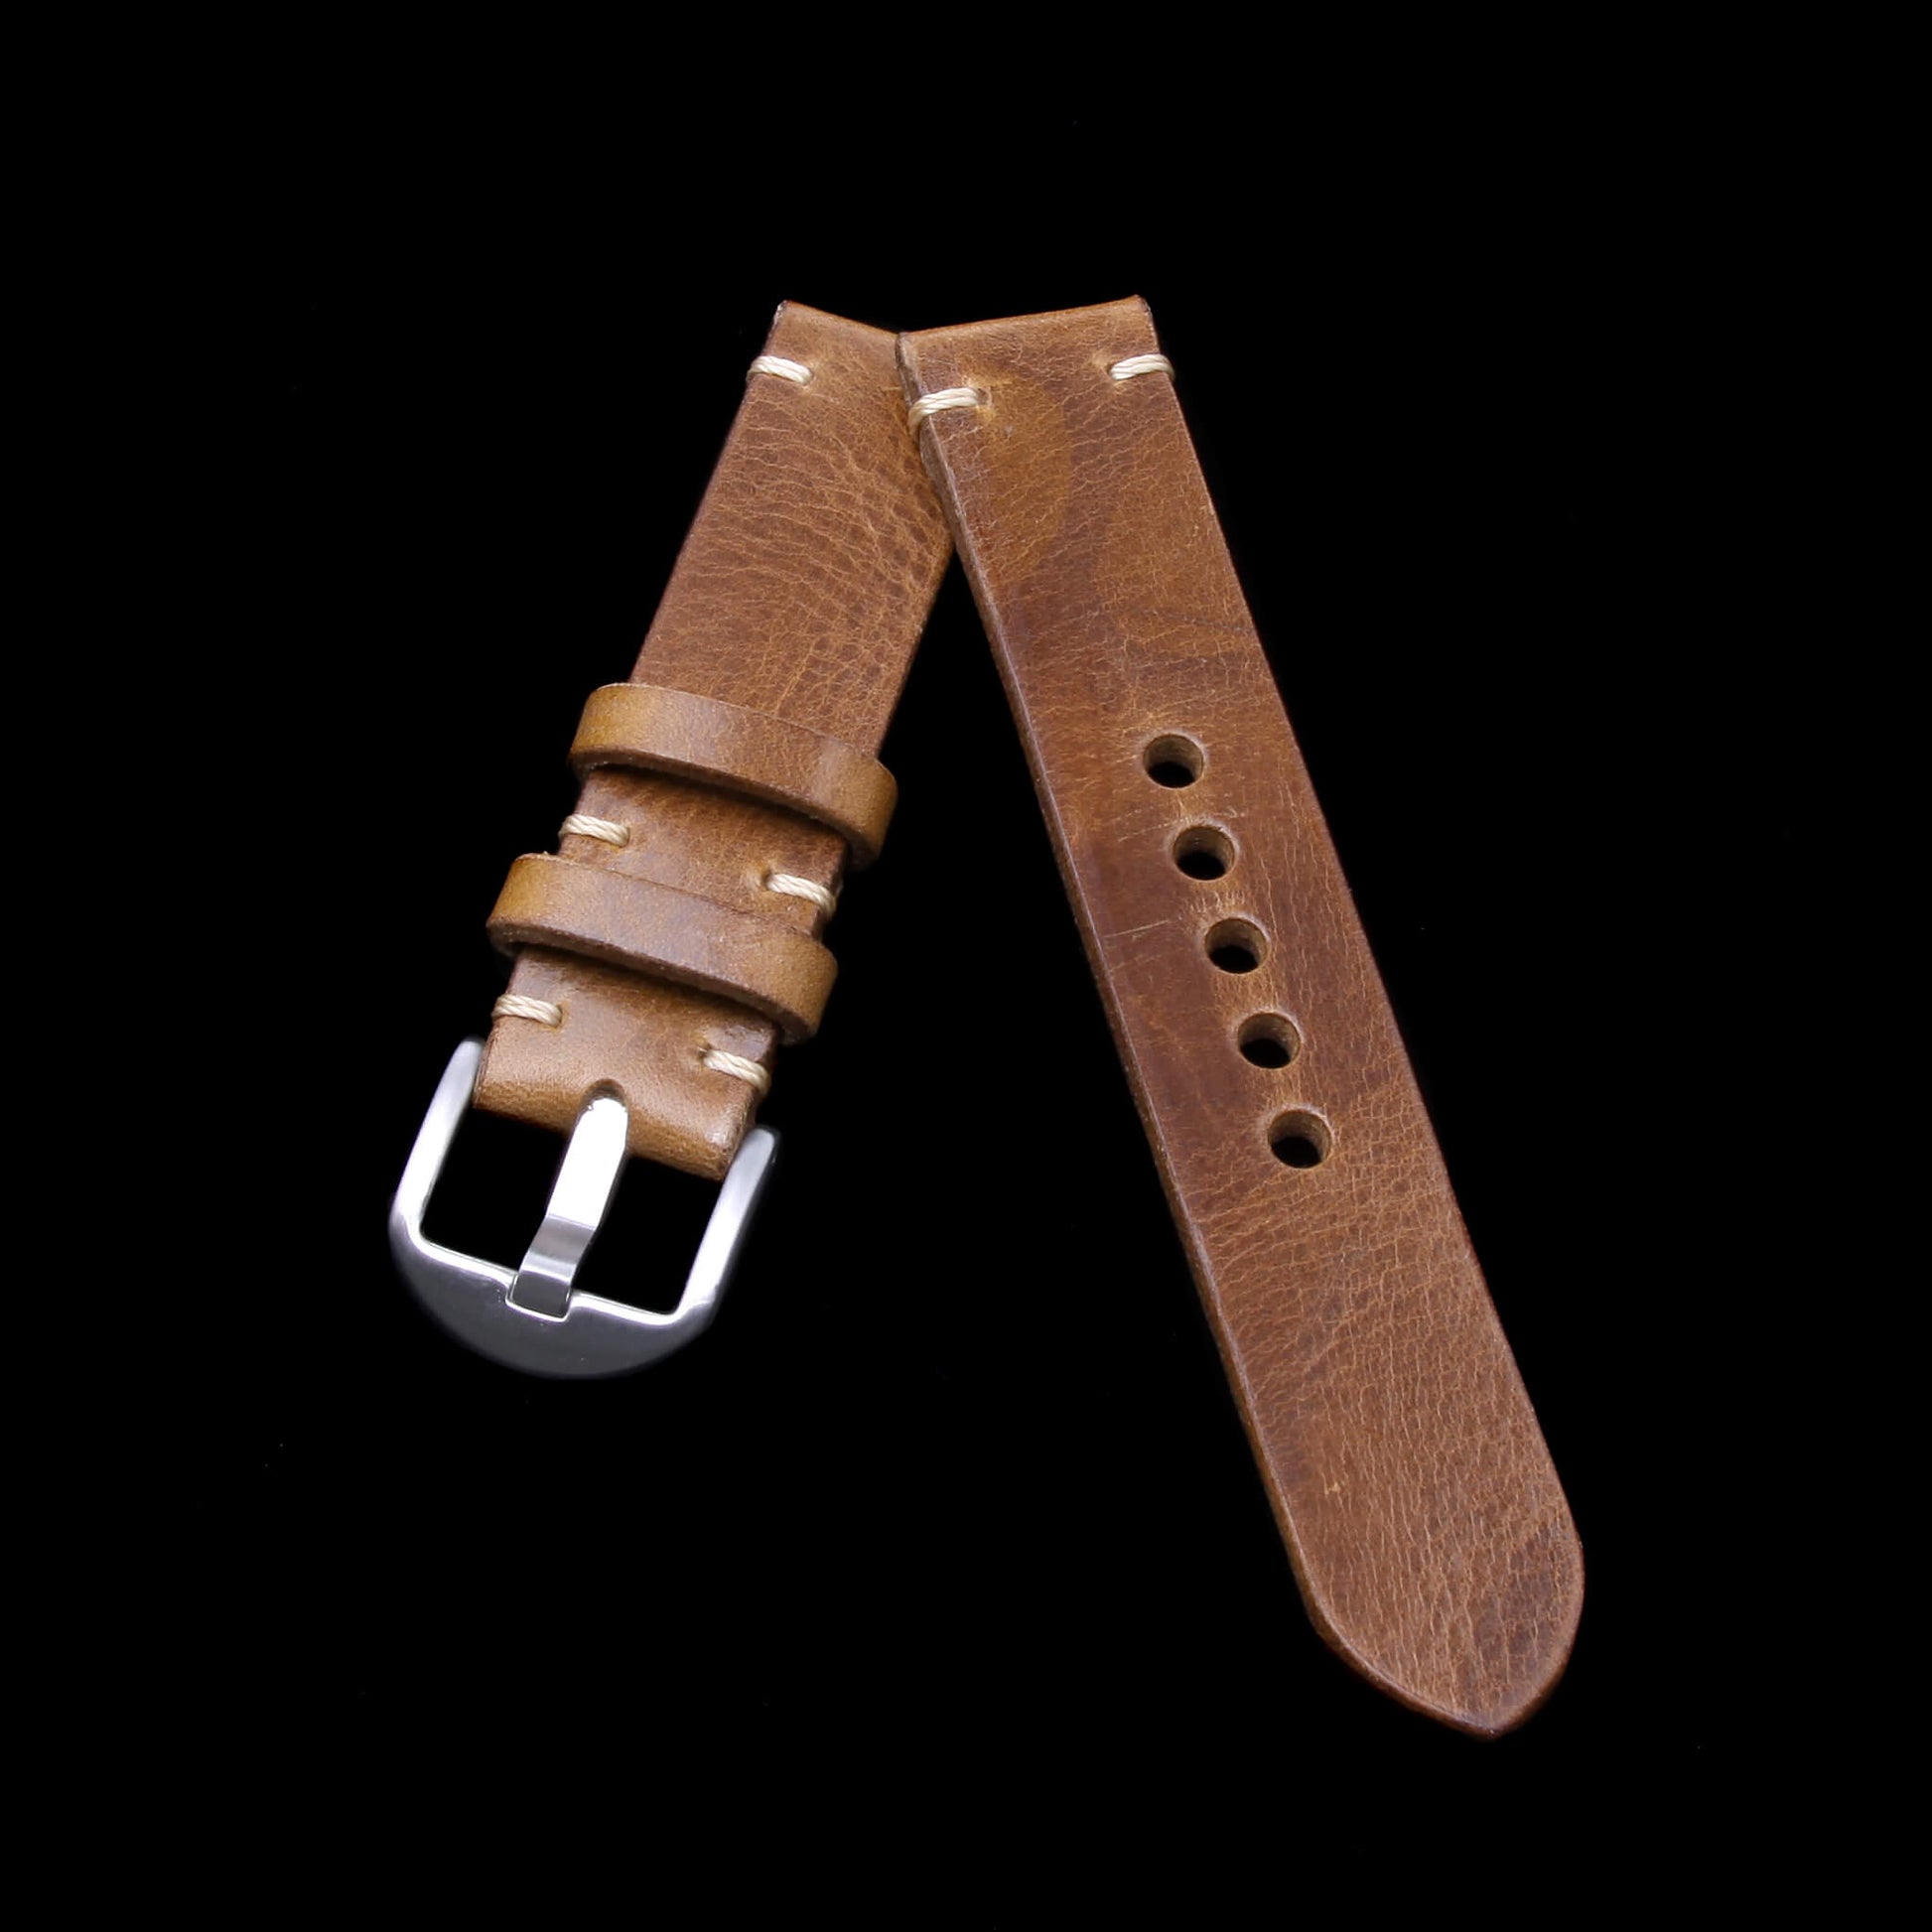 Upgrade your Apple Watch in camo: Military 102 Italian leather strap, hand-stitched for a perfect fit and bold look.